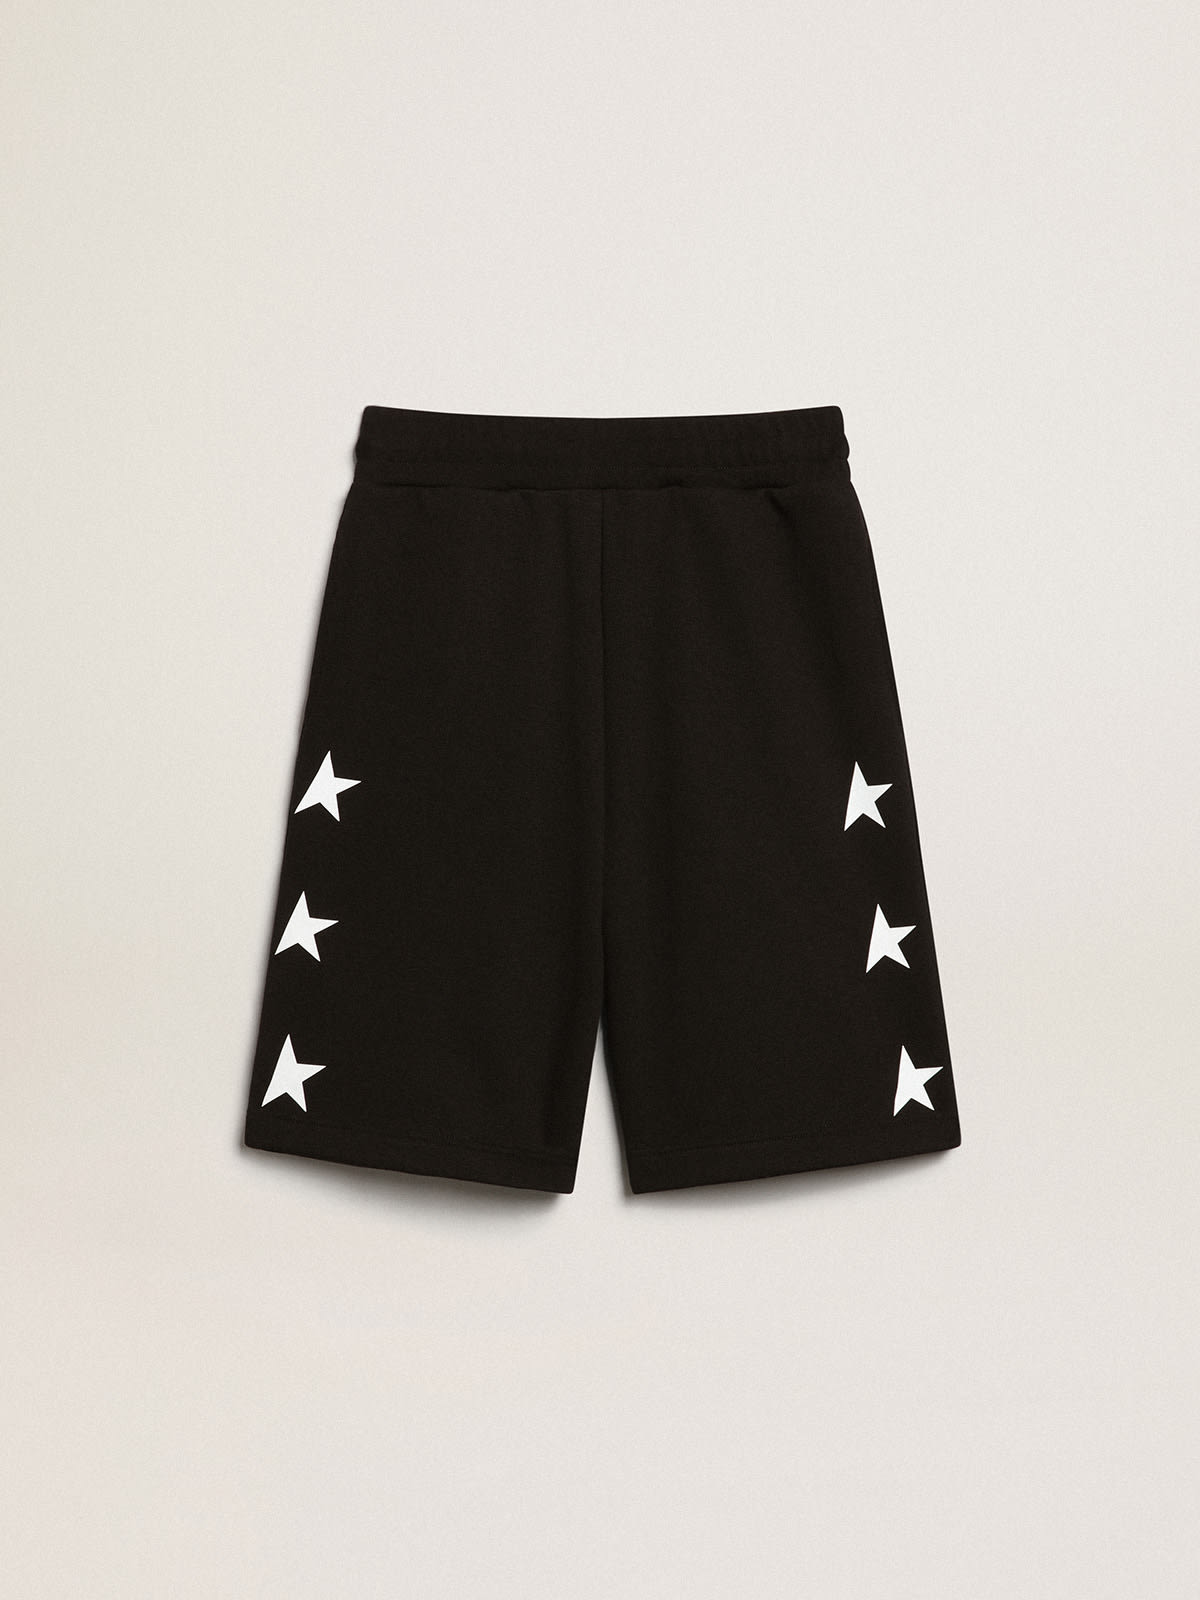 Golden Goose - Black Star Collection Bermuda shorts with contrasting white stars in 